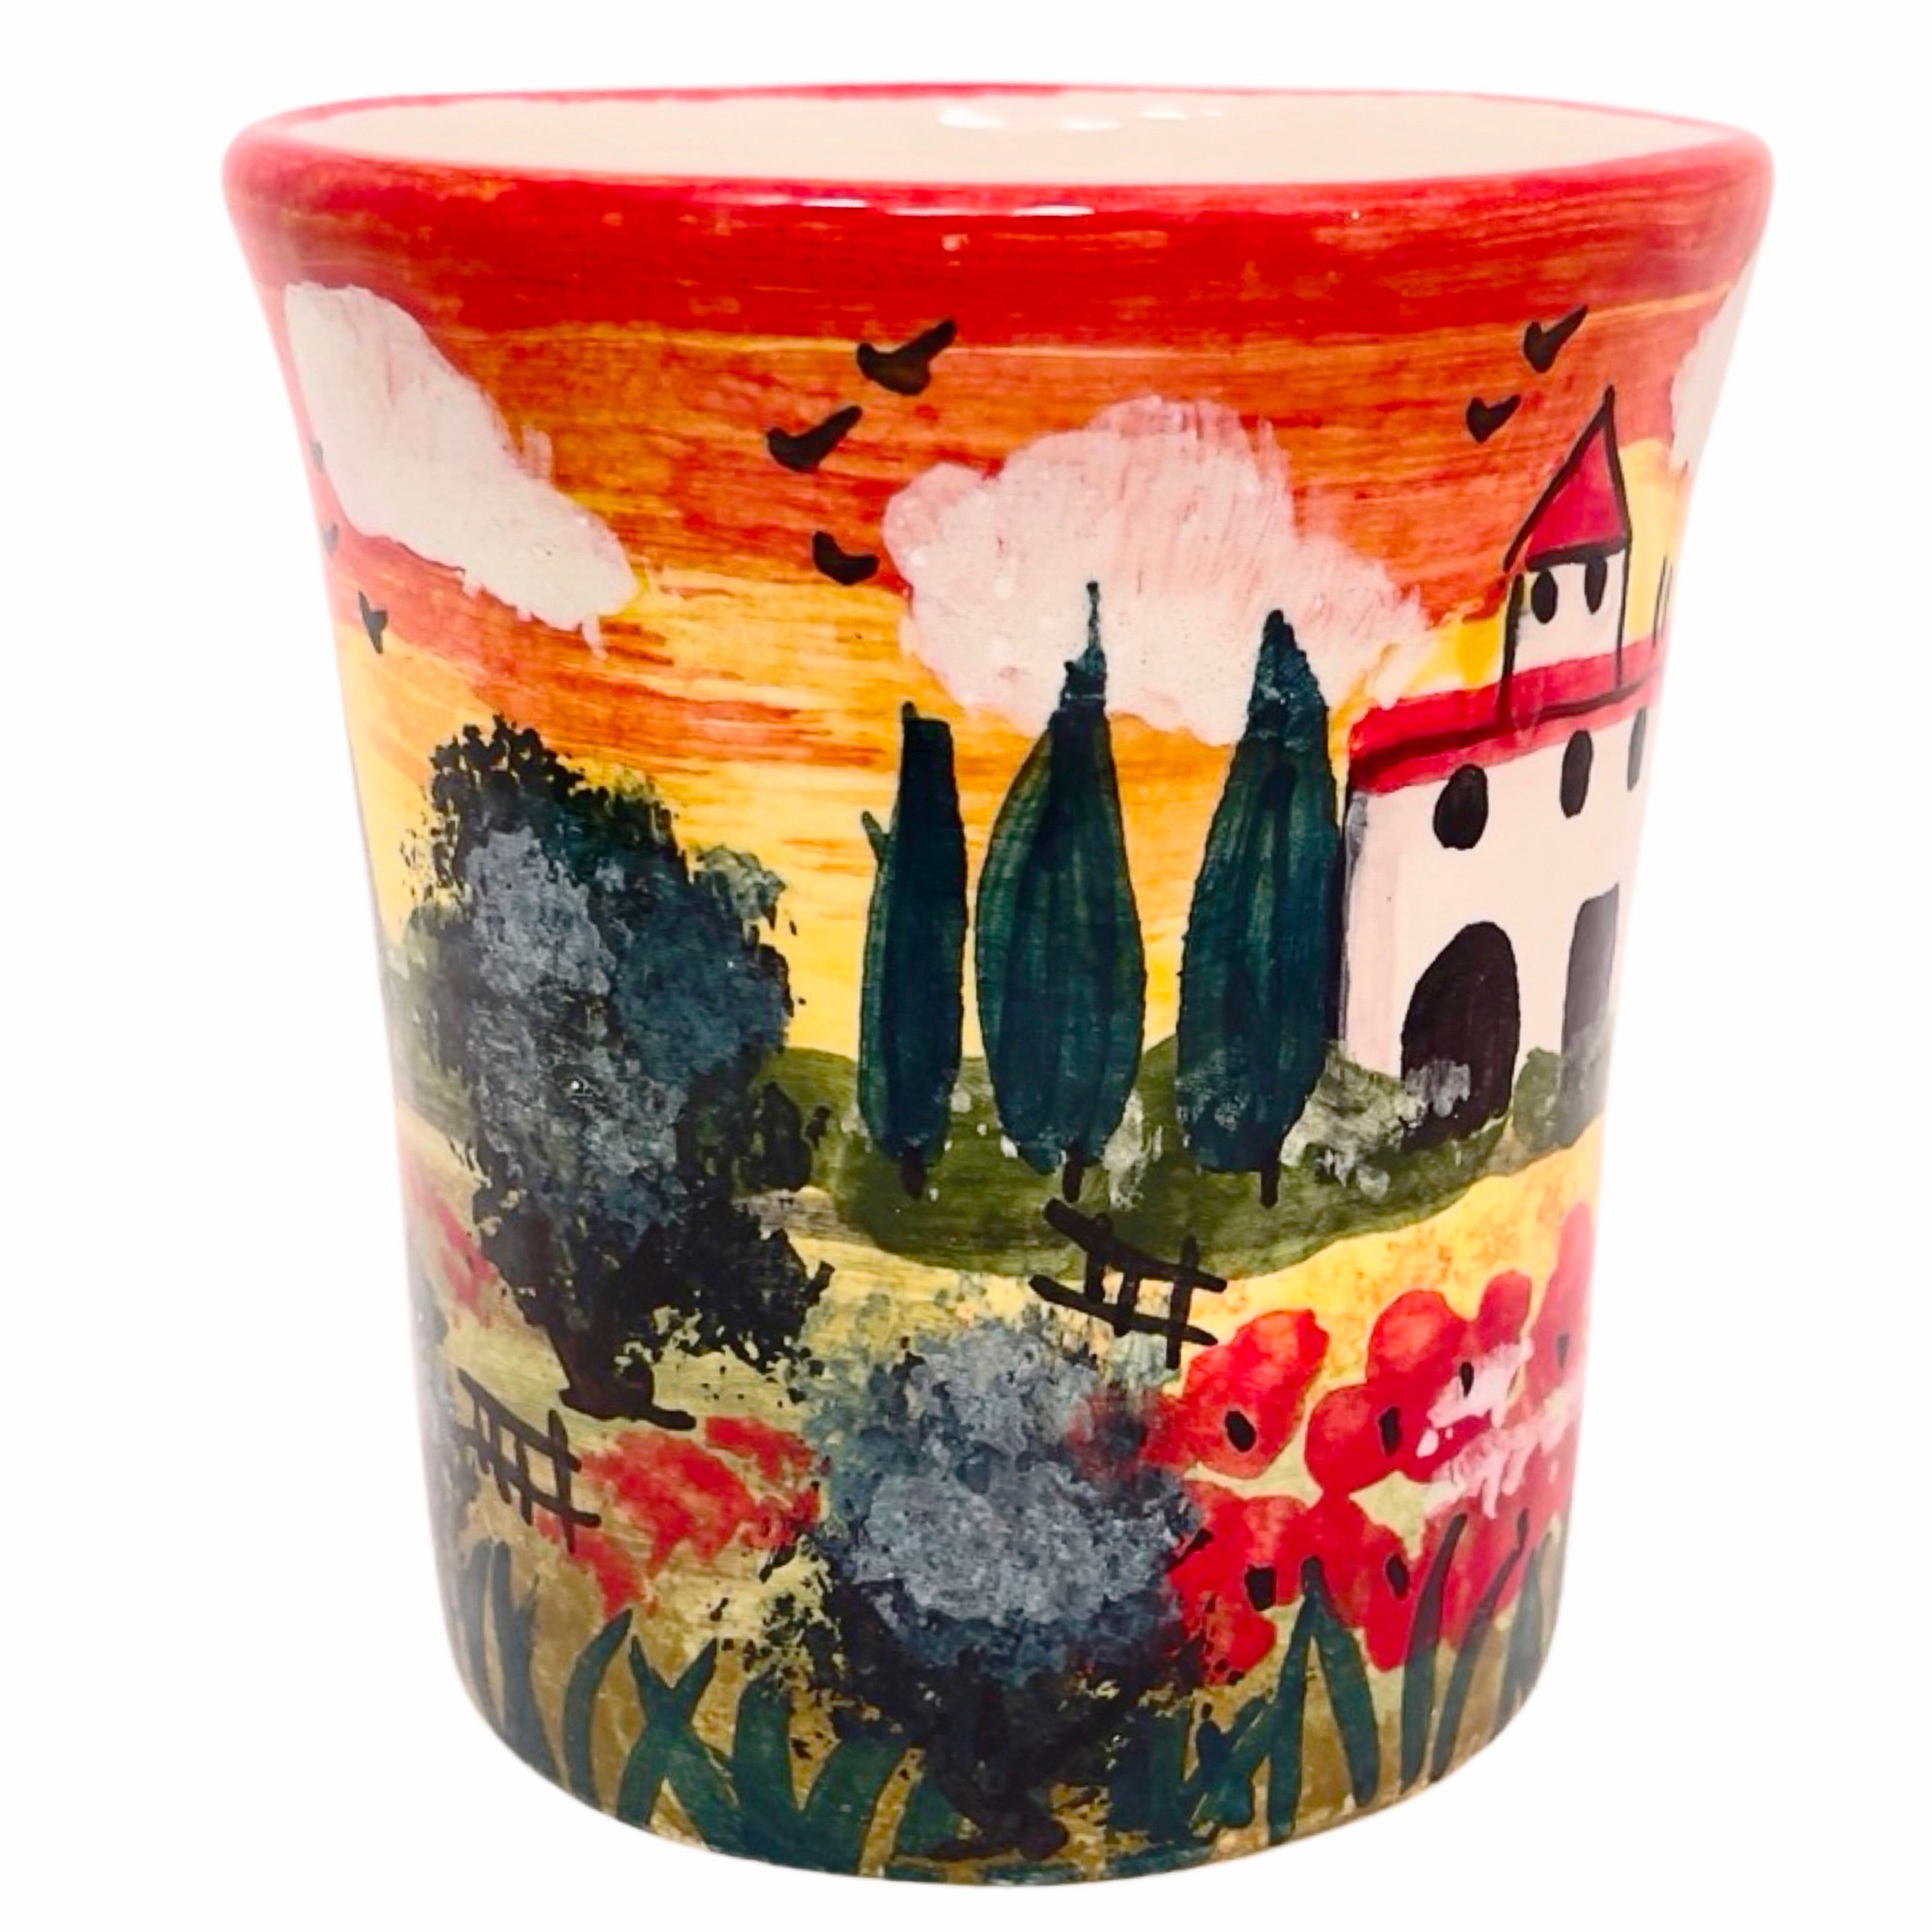 Tuscan Sunset Countryside Mug, ceramics, pottery, italian design, majolica, handmade, handcrafted, handpainted, home decor, kitchen art, home goods, deruta, majolica, Artisan, treasures, traditional art, modern art, gift ideas, style, SF, shop small business, artists, shop online, landmark store, legacy, one of a kind, limited edition, gift guide, gift shop, retail shop, decorations, shopping, italy, home staging, home decorating, home interiors